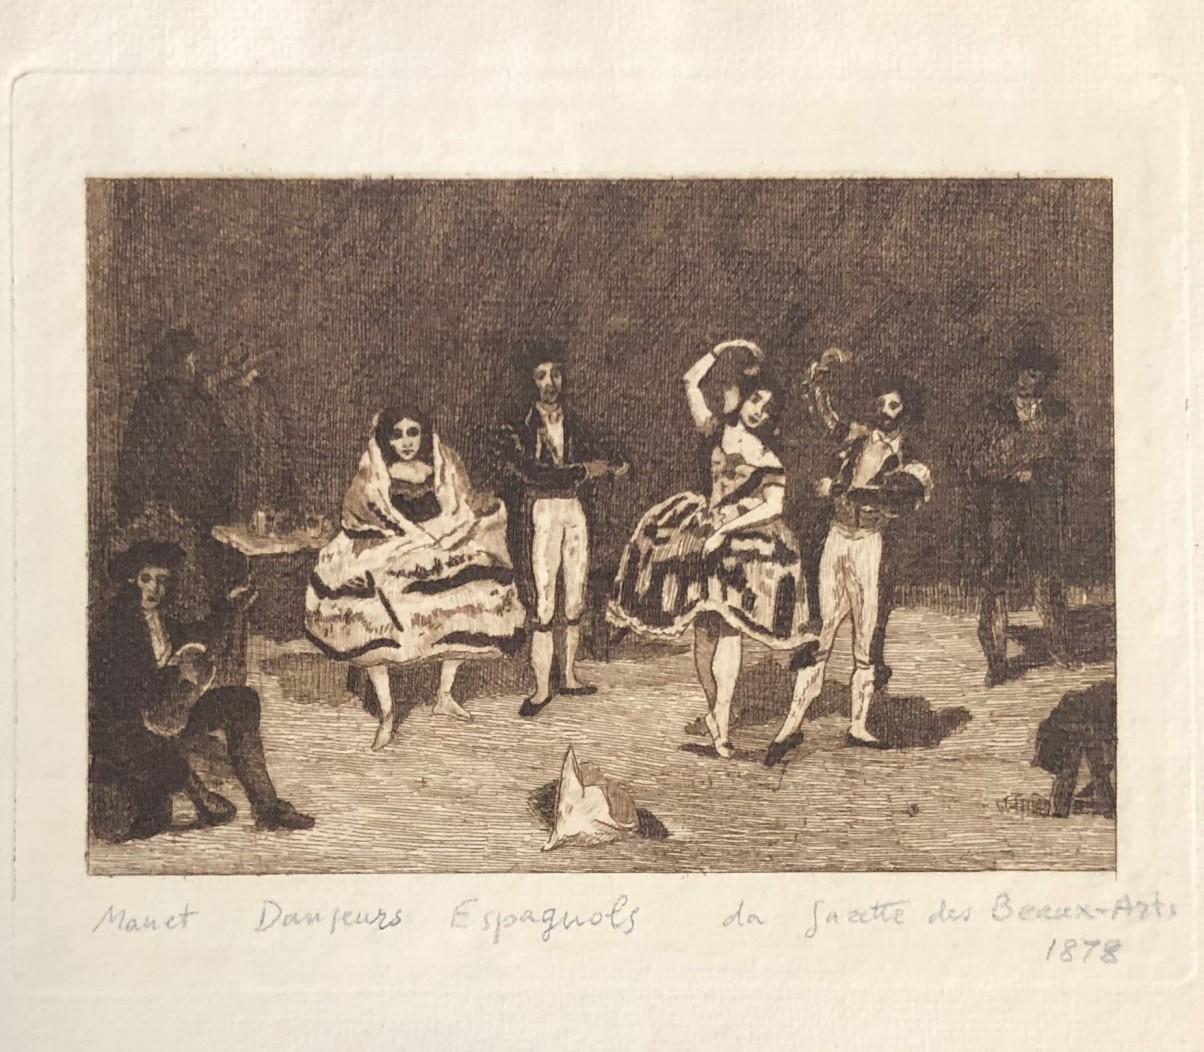 Danseurs Espagnols is an original beautiful etching made by Auguste Lauzet after the painting by the Parisian artist Édouard Manet (1832-1883), the most important interpreter of the Pre-Impressionist artistic movement. The etching was published in